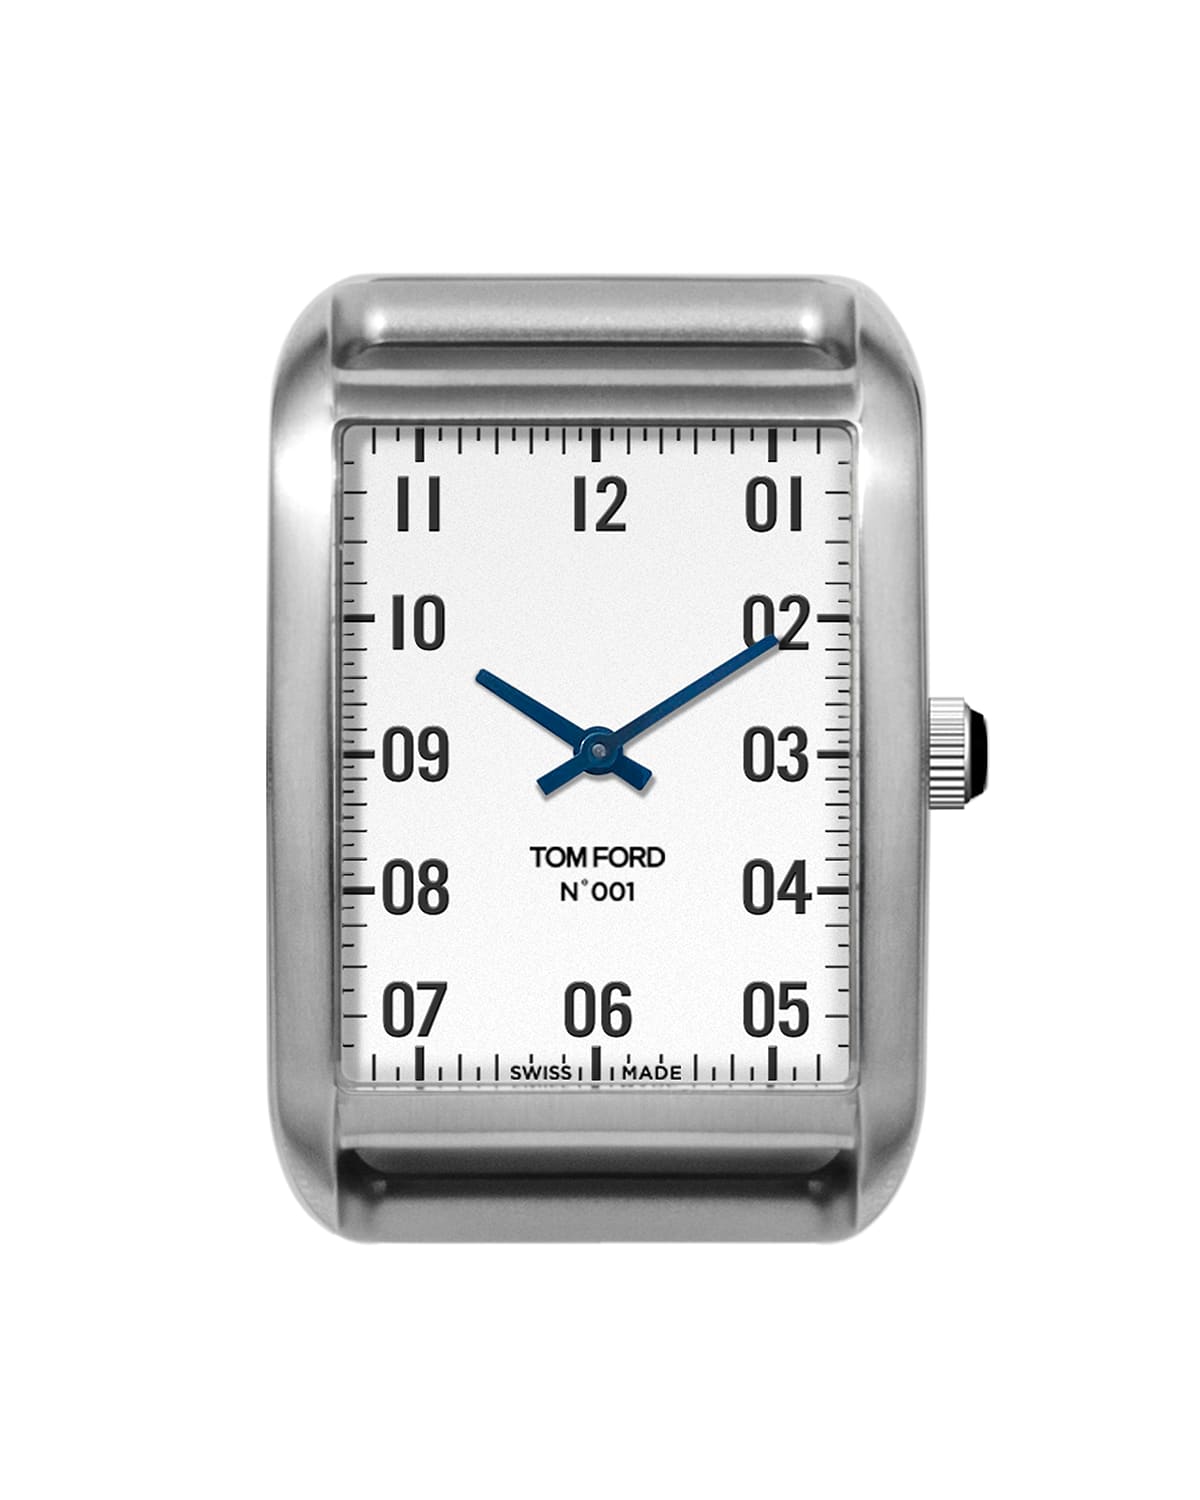 Brushed Stainless Steel Case, White Dial, Large